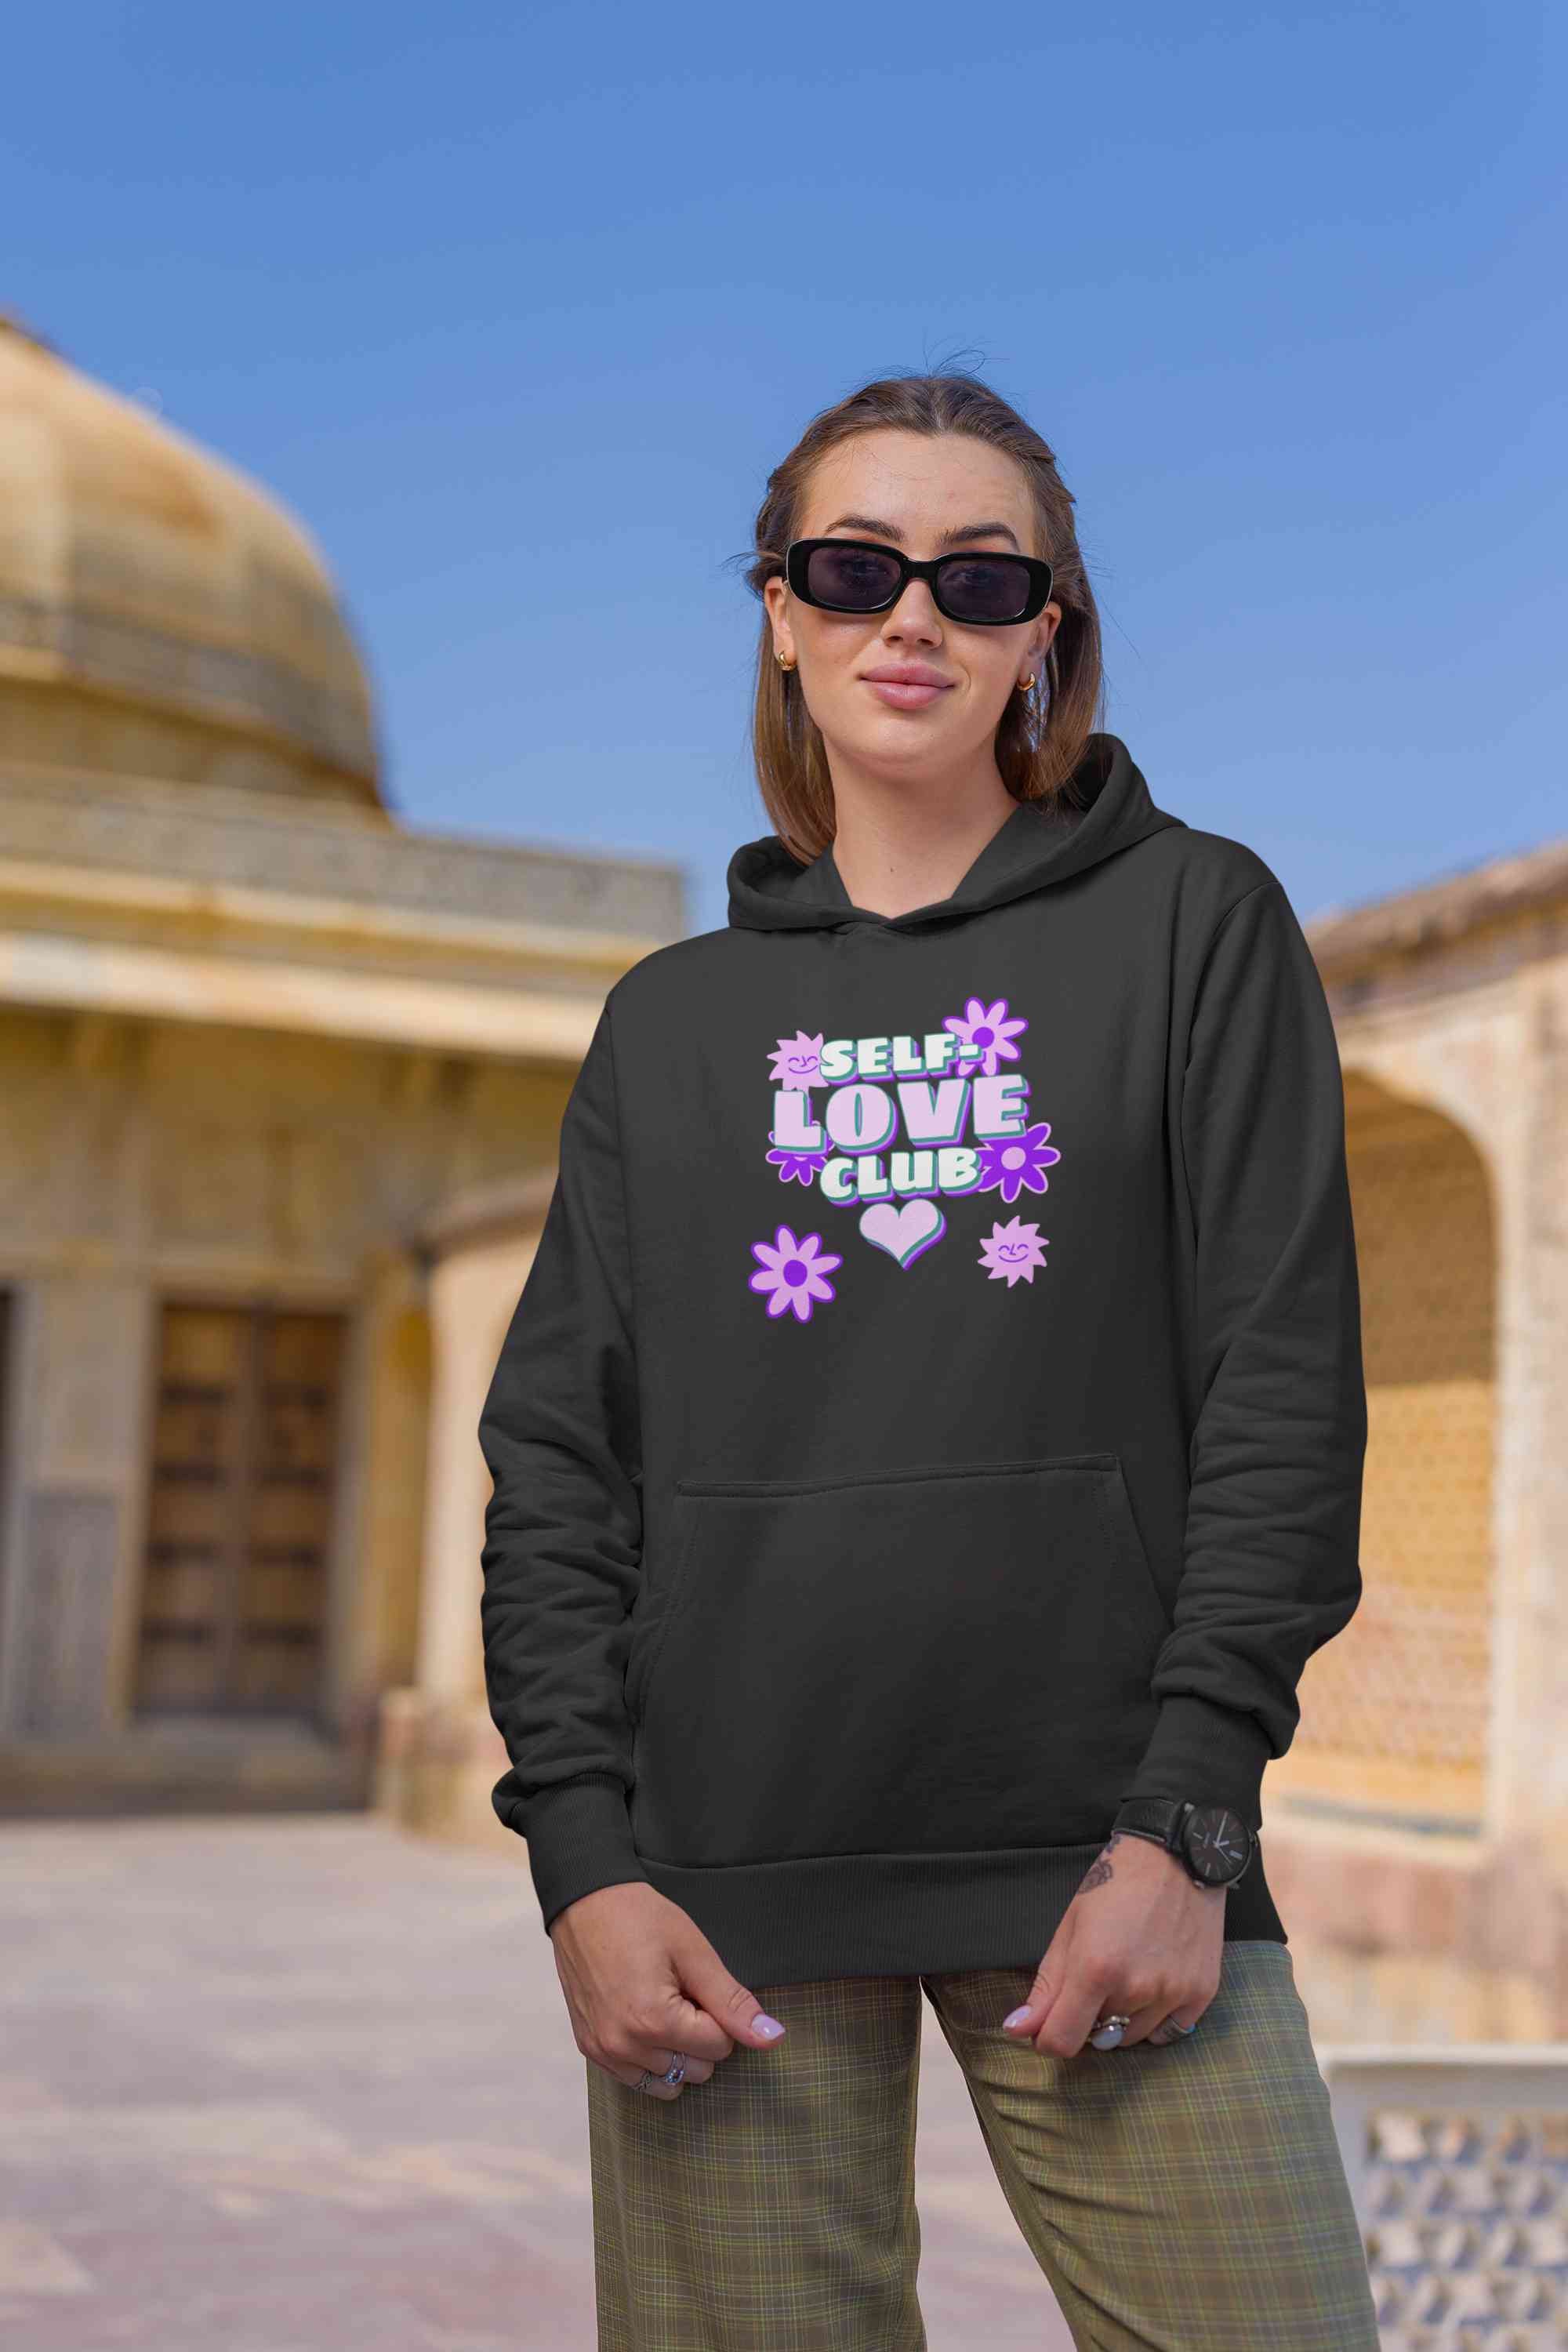 60s Inspired A Self Love Quote Hoodies for Women-FunkyTradition